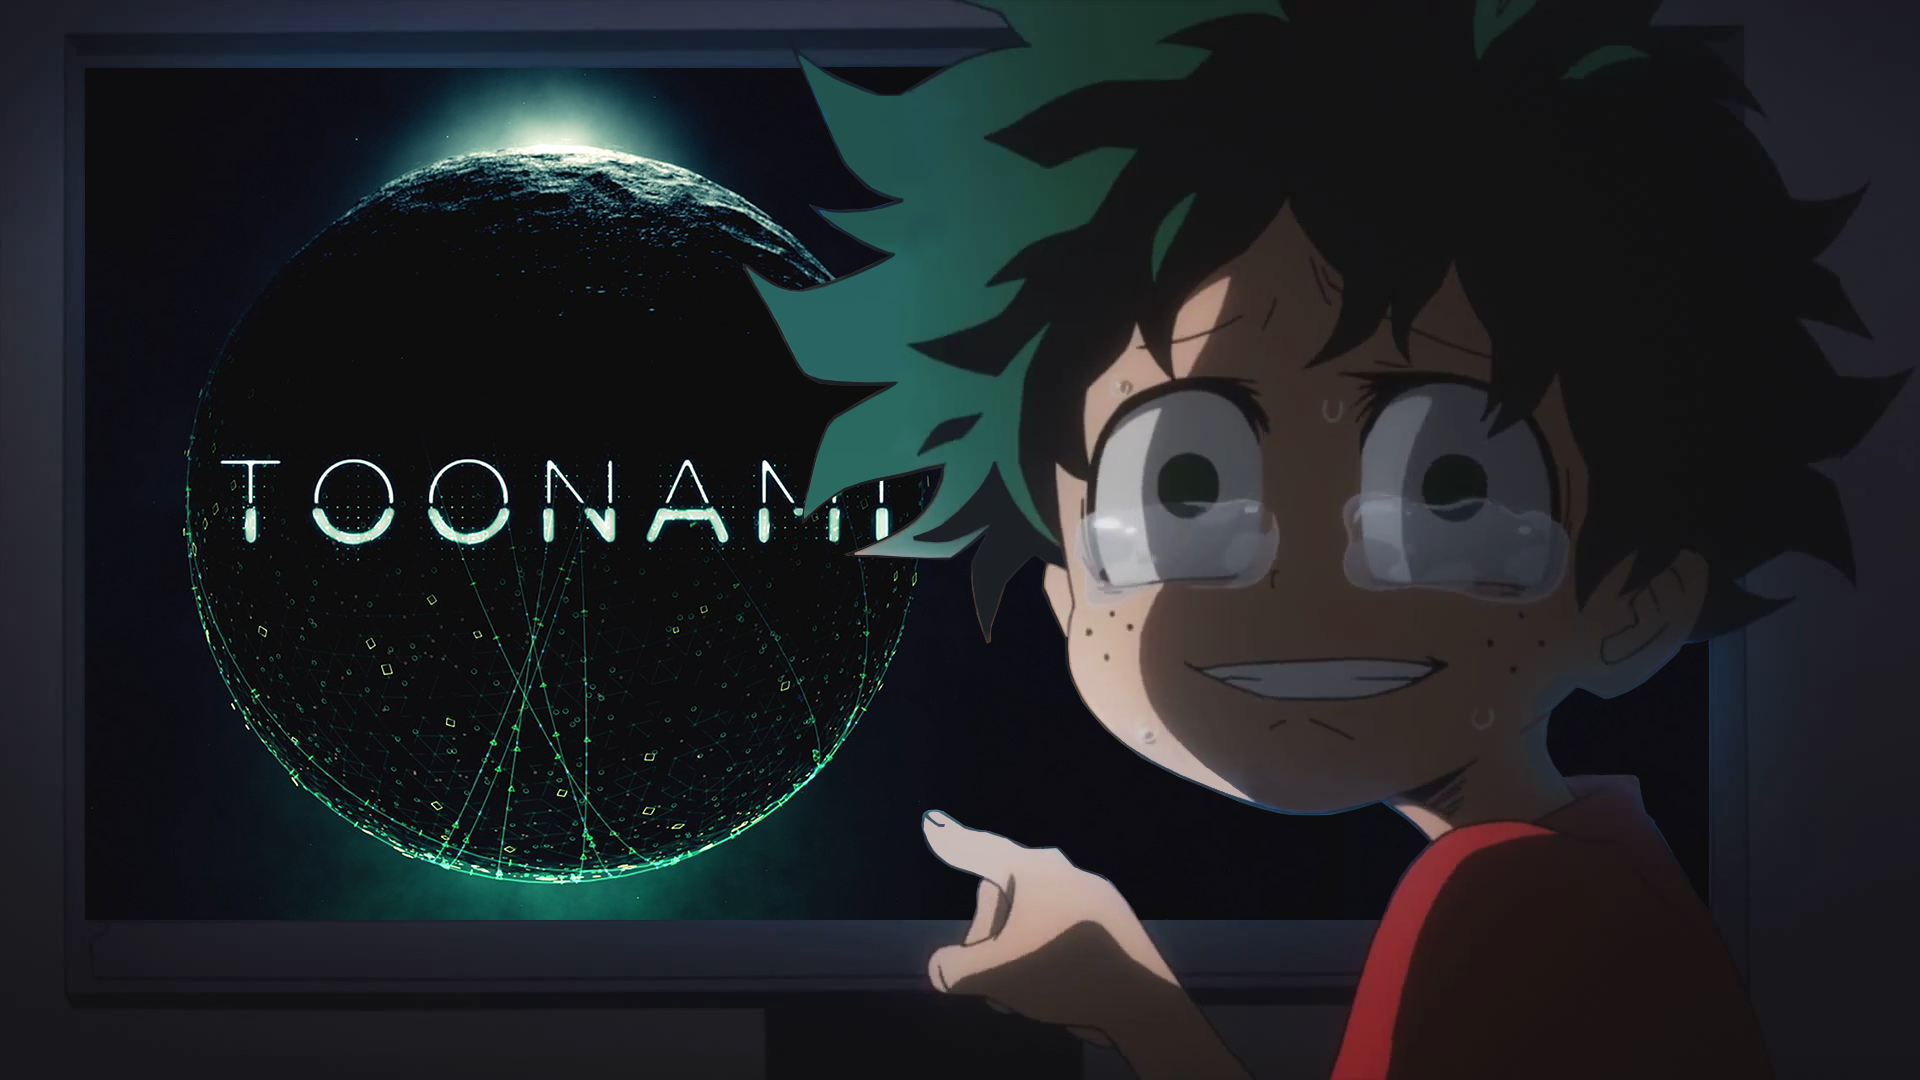 ‘My Hero Academia’ is Joining the Toonami Block Starting on May 5th